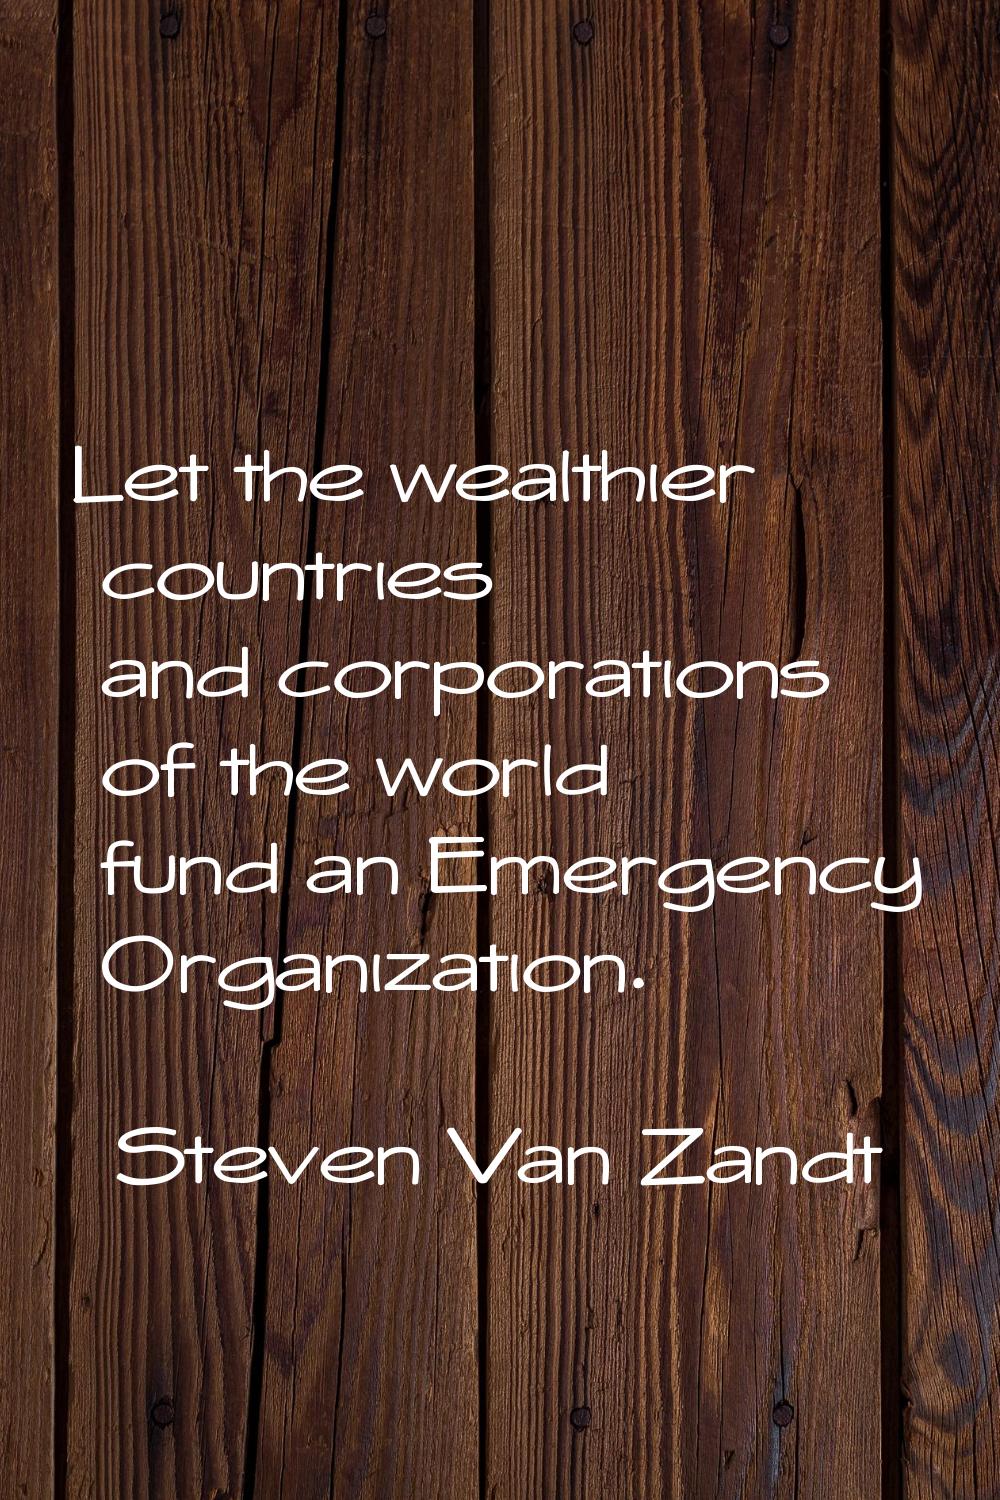 Let the wealthier countries and corporations of the world fund an Emergency Organization.